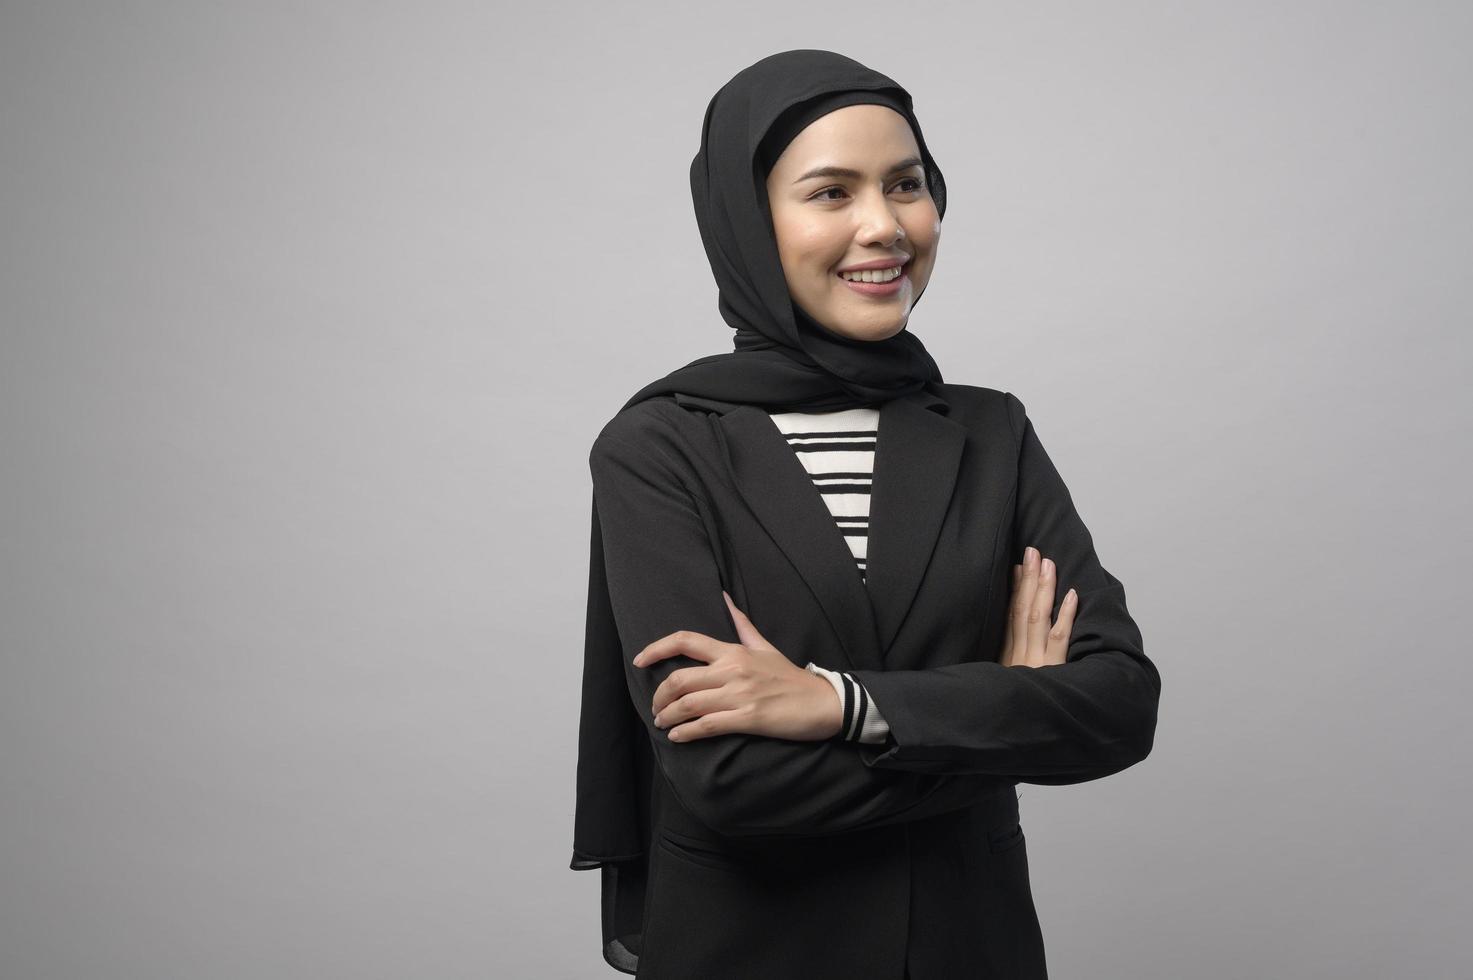 Beautiful business woman with hijab portrait on white background photo